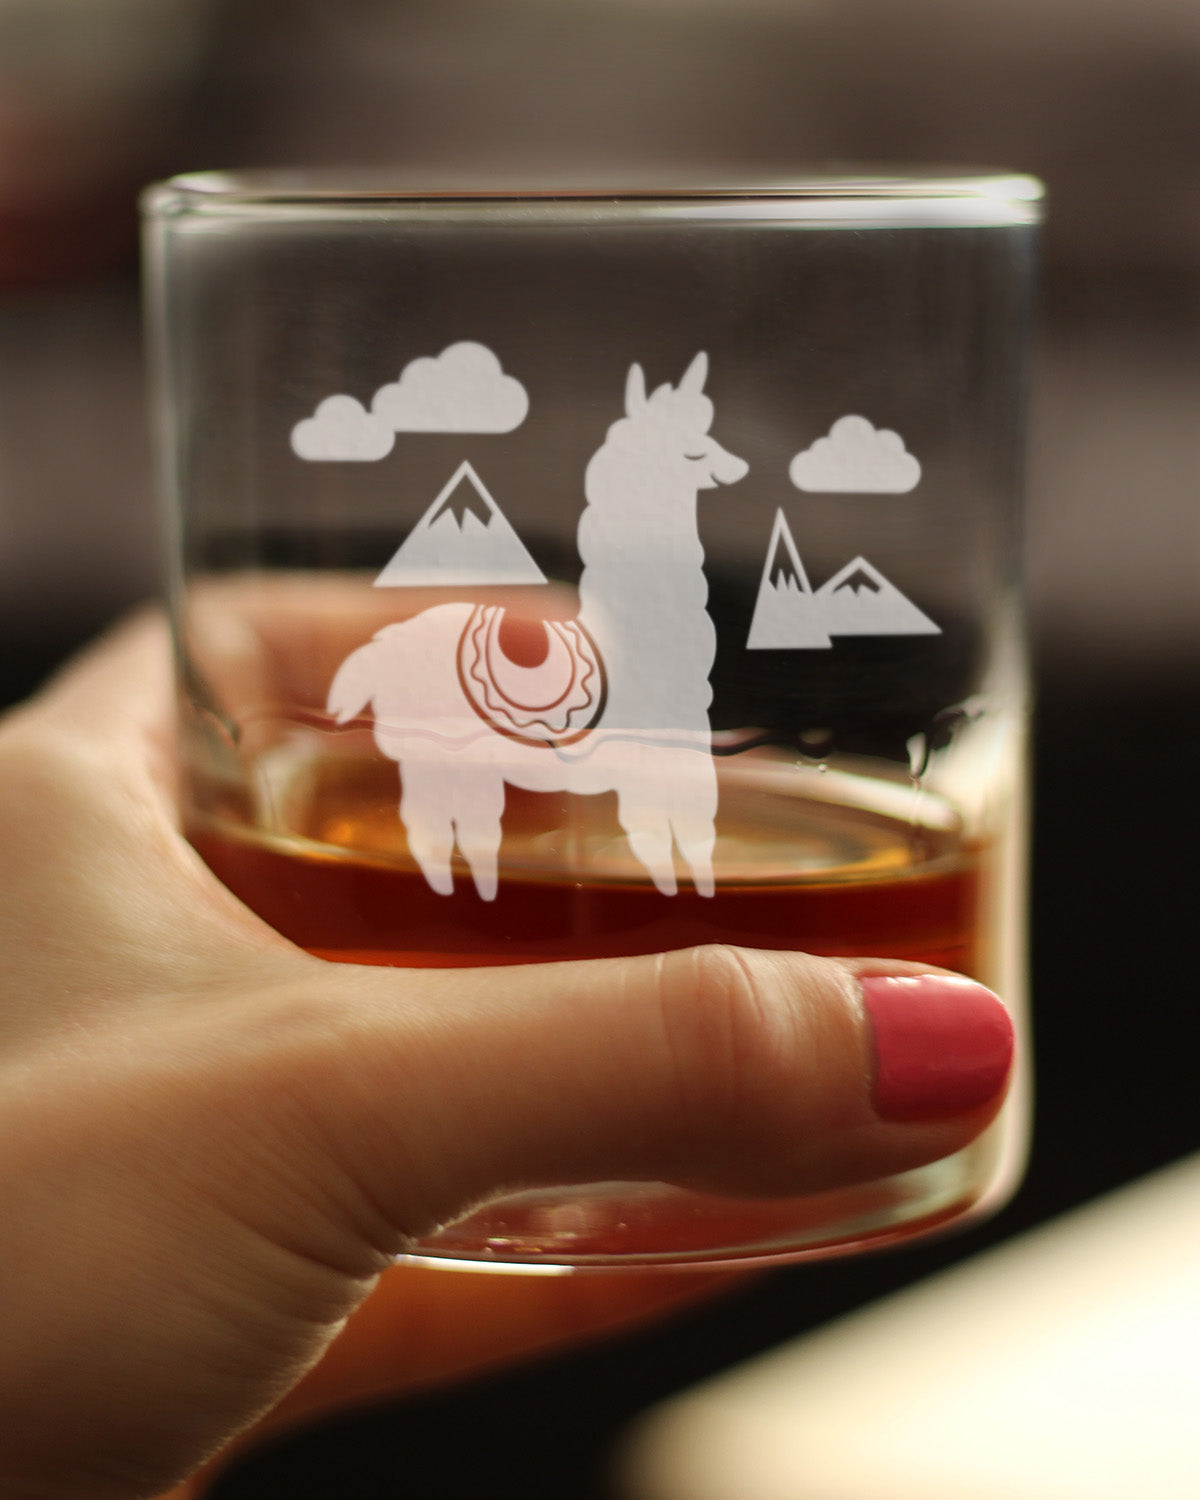 Alpaca Whiskey Rocks Glass - Unique Funny Farm Animal Themed Decor and Gifts for Alpaca Lovers - 10.25 Oz